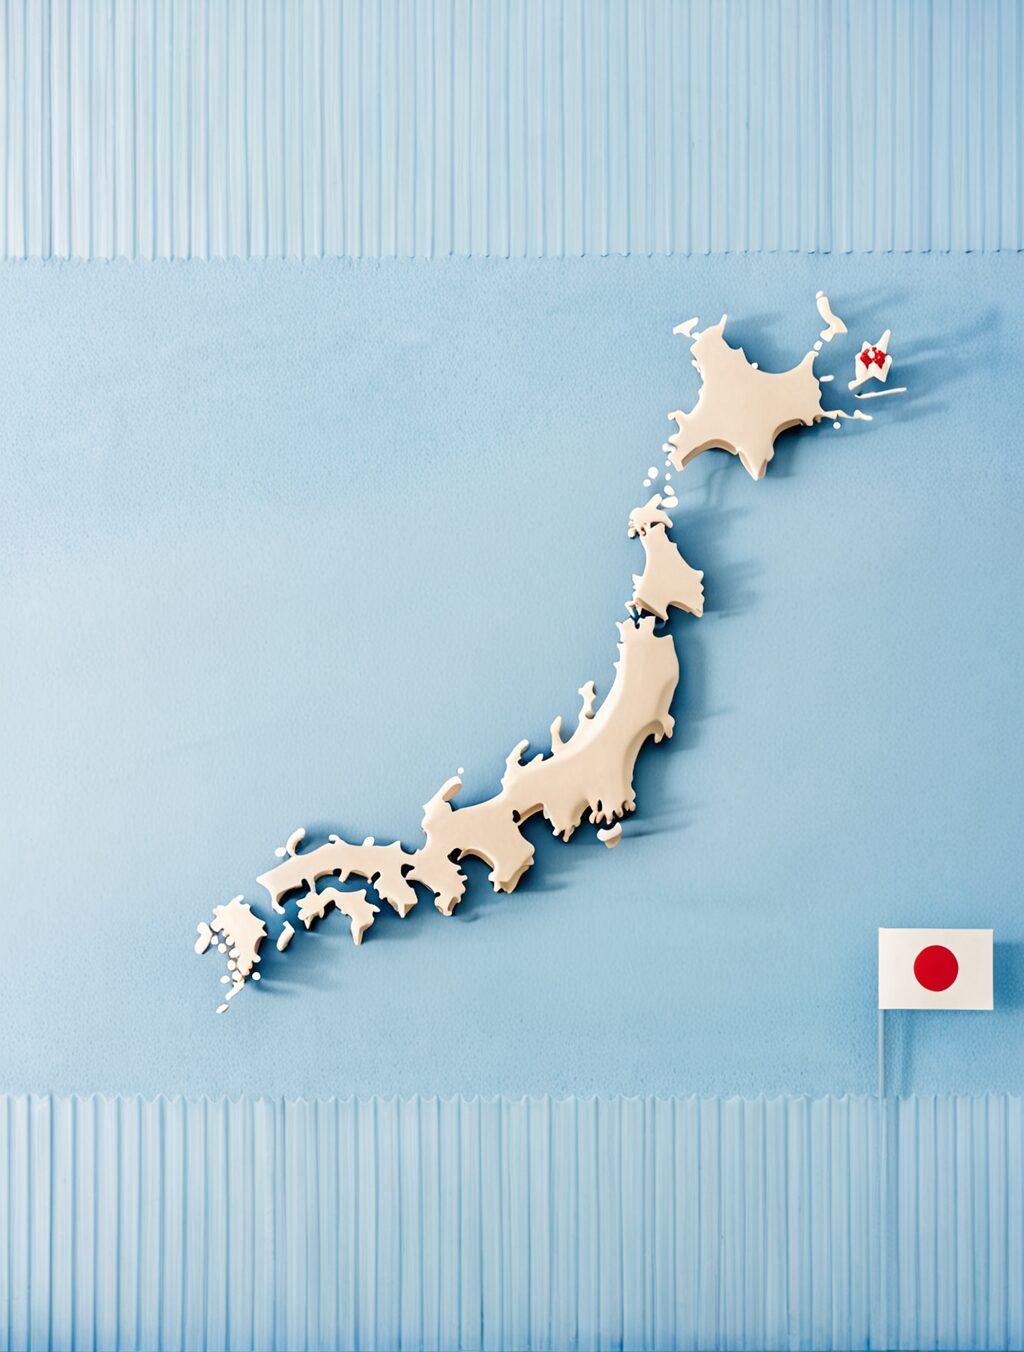 how many days needed to visit japan